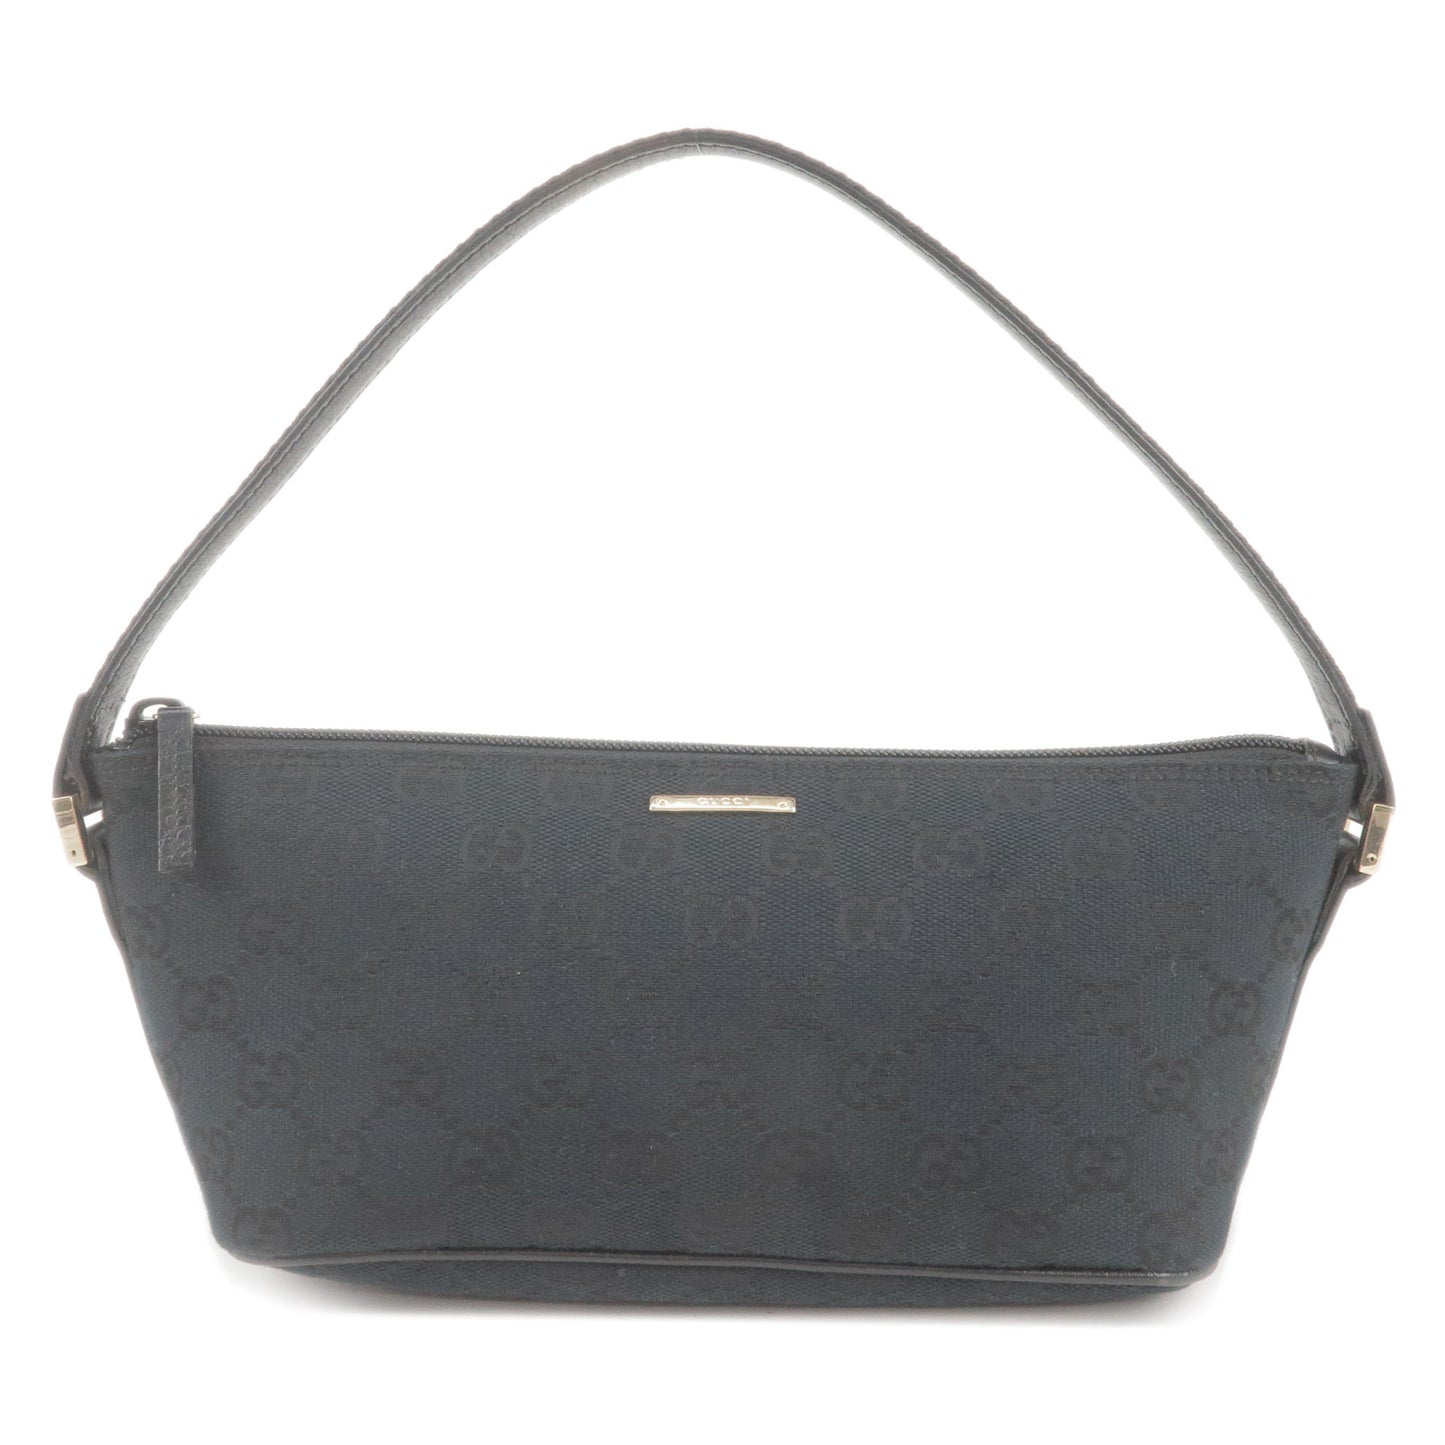 GUCCI-GG-Canvas-Leather-Boat-Bag-Hand-Bag-Black-141809